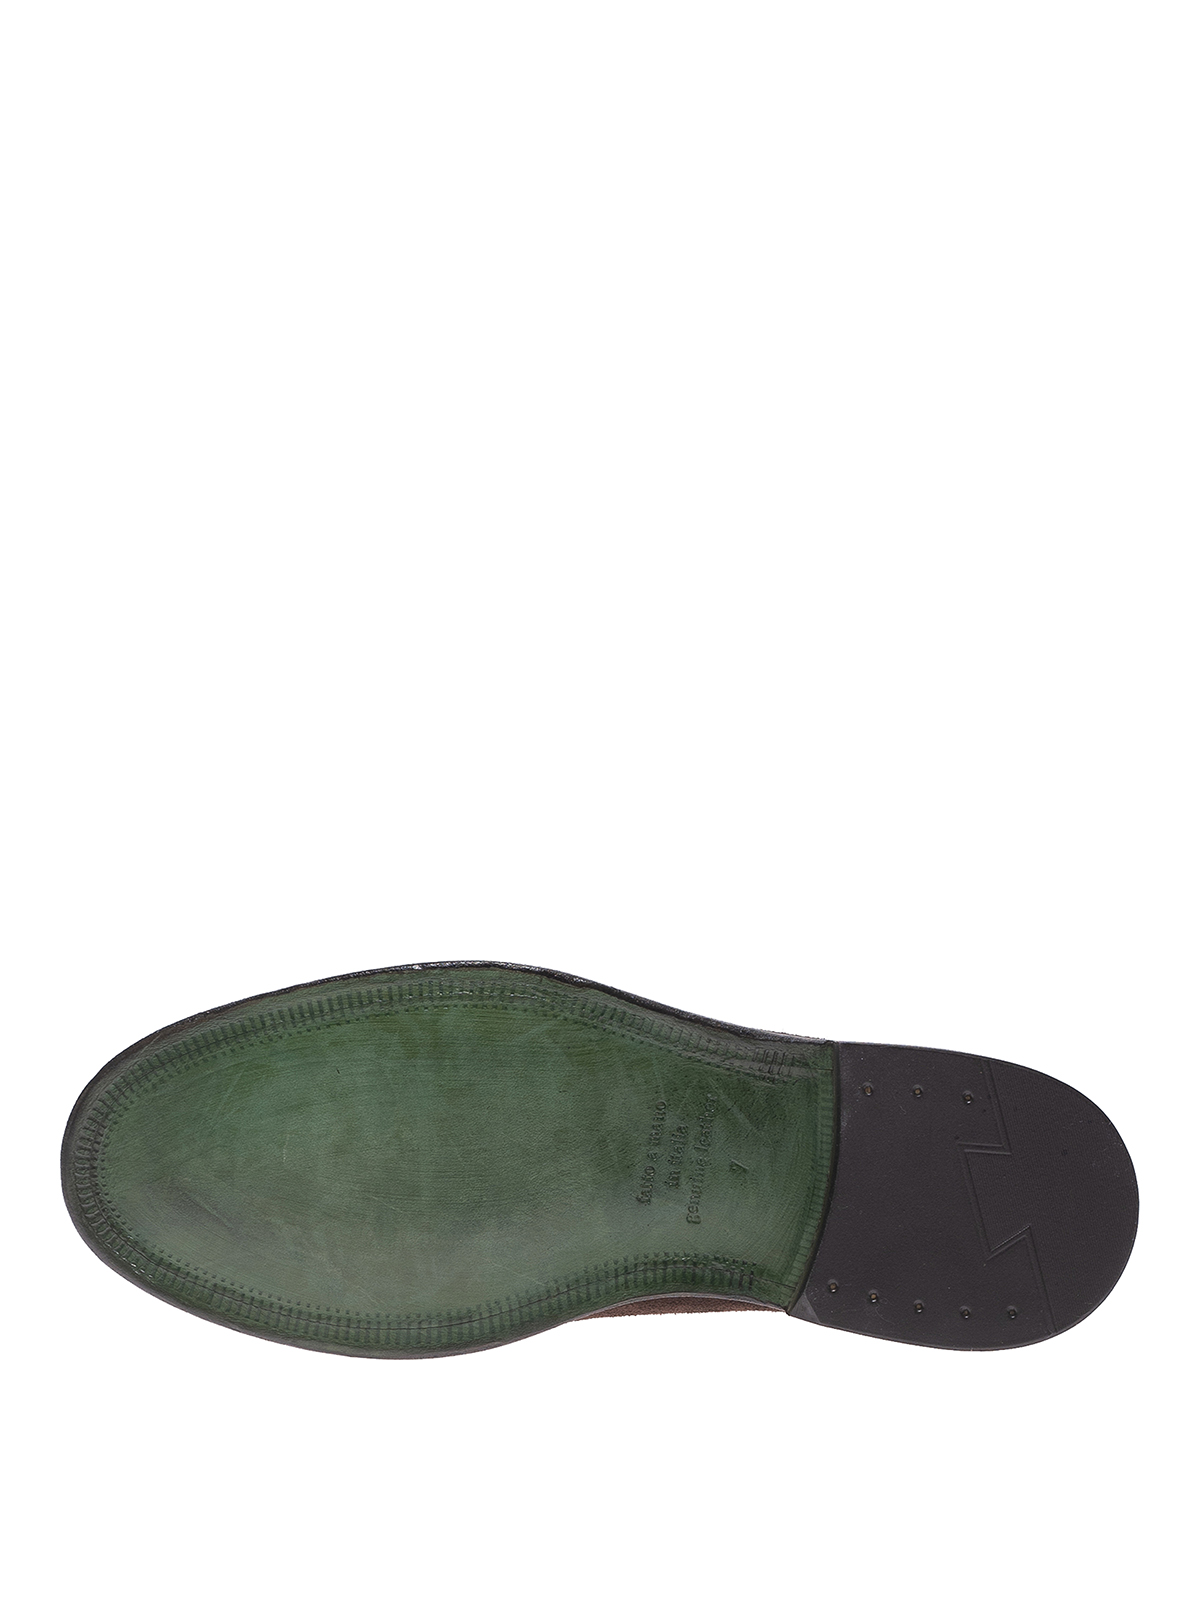 green george shoes online